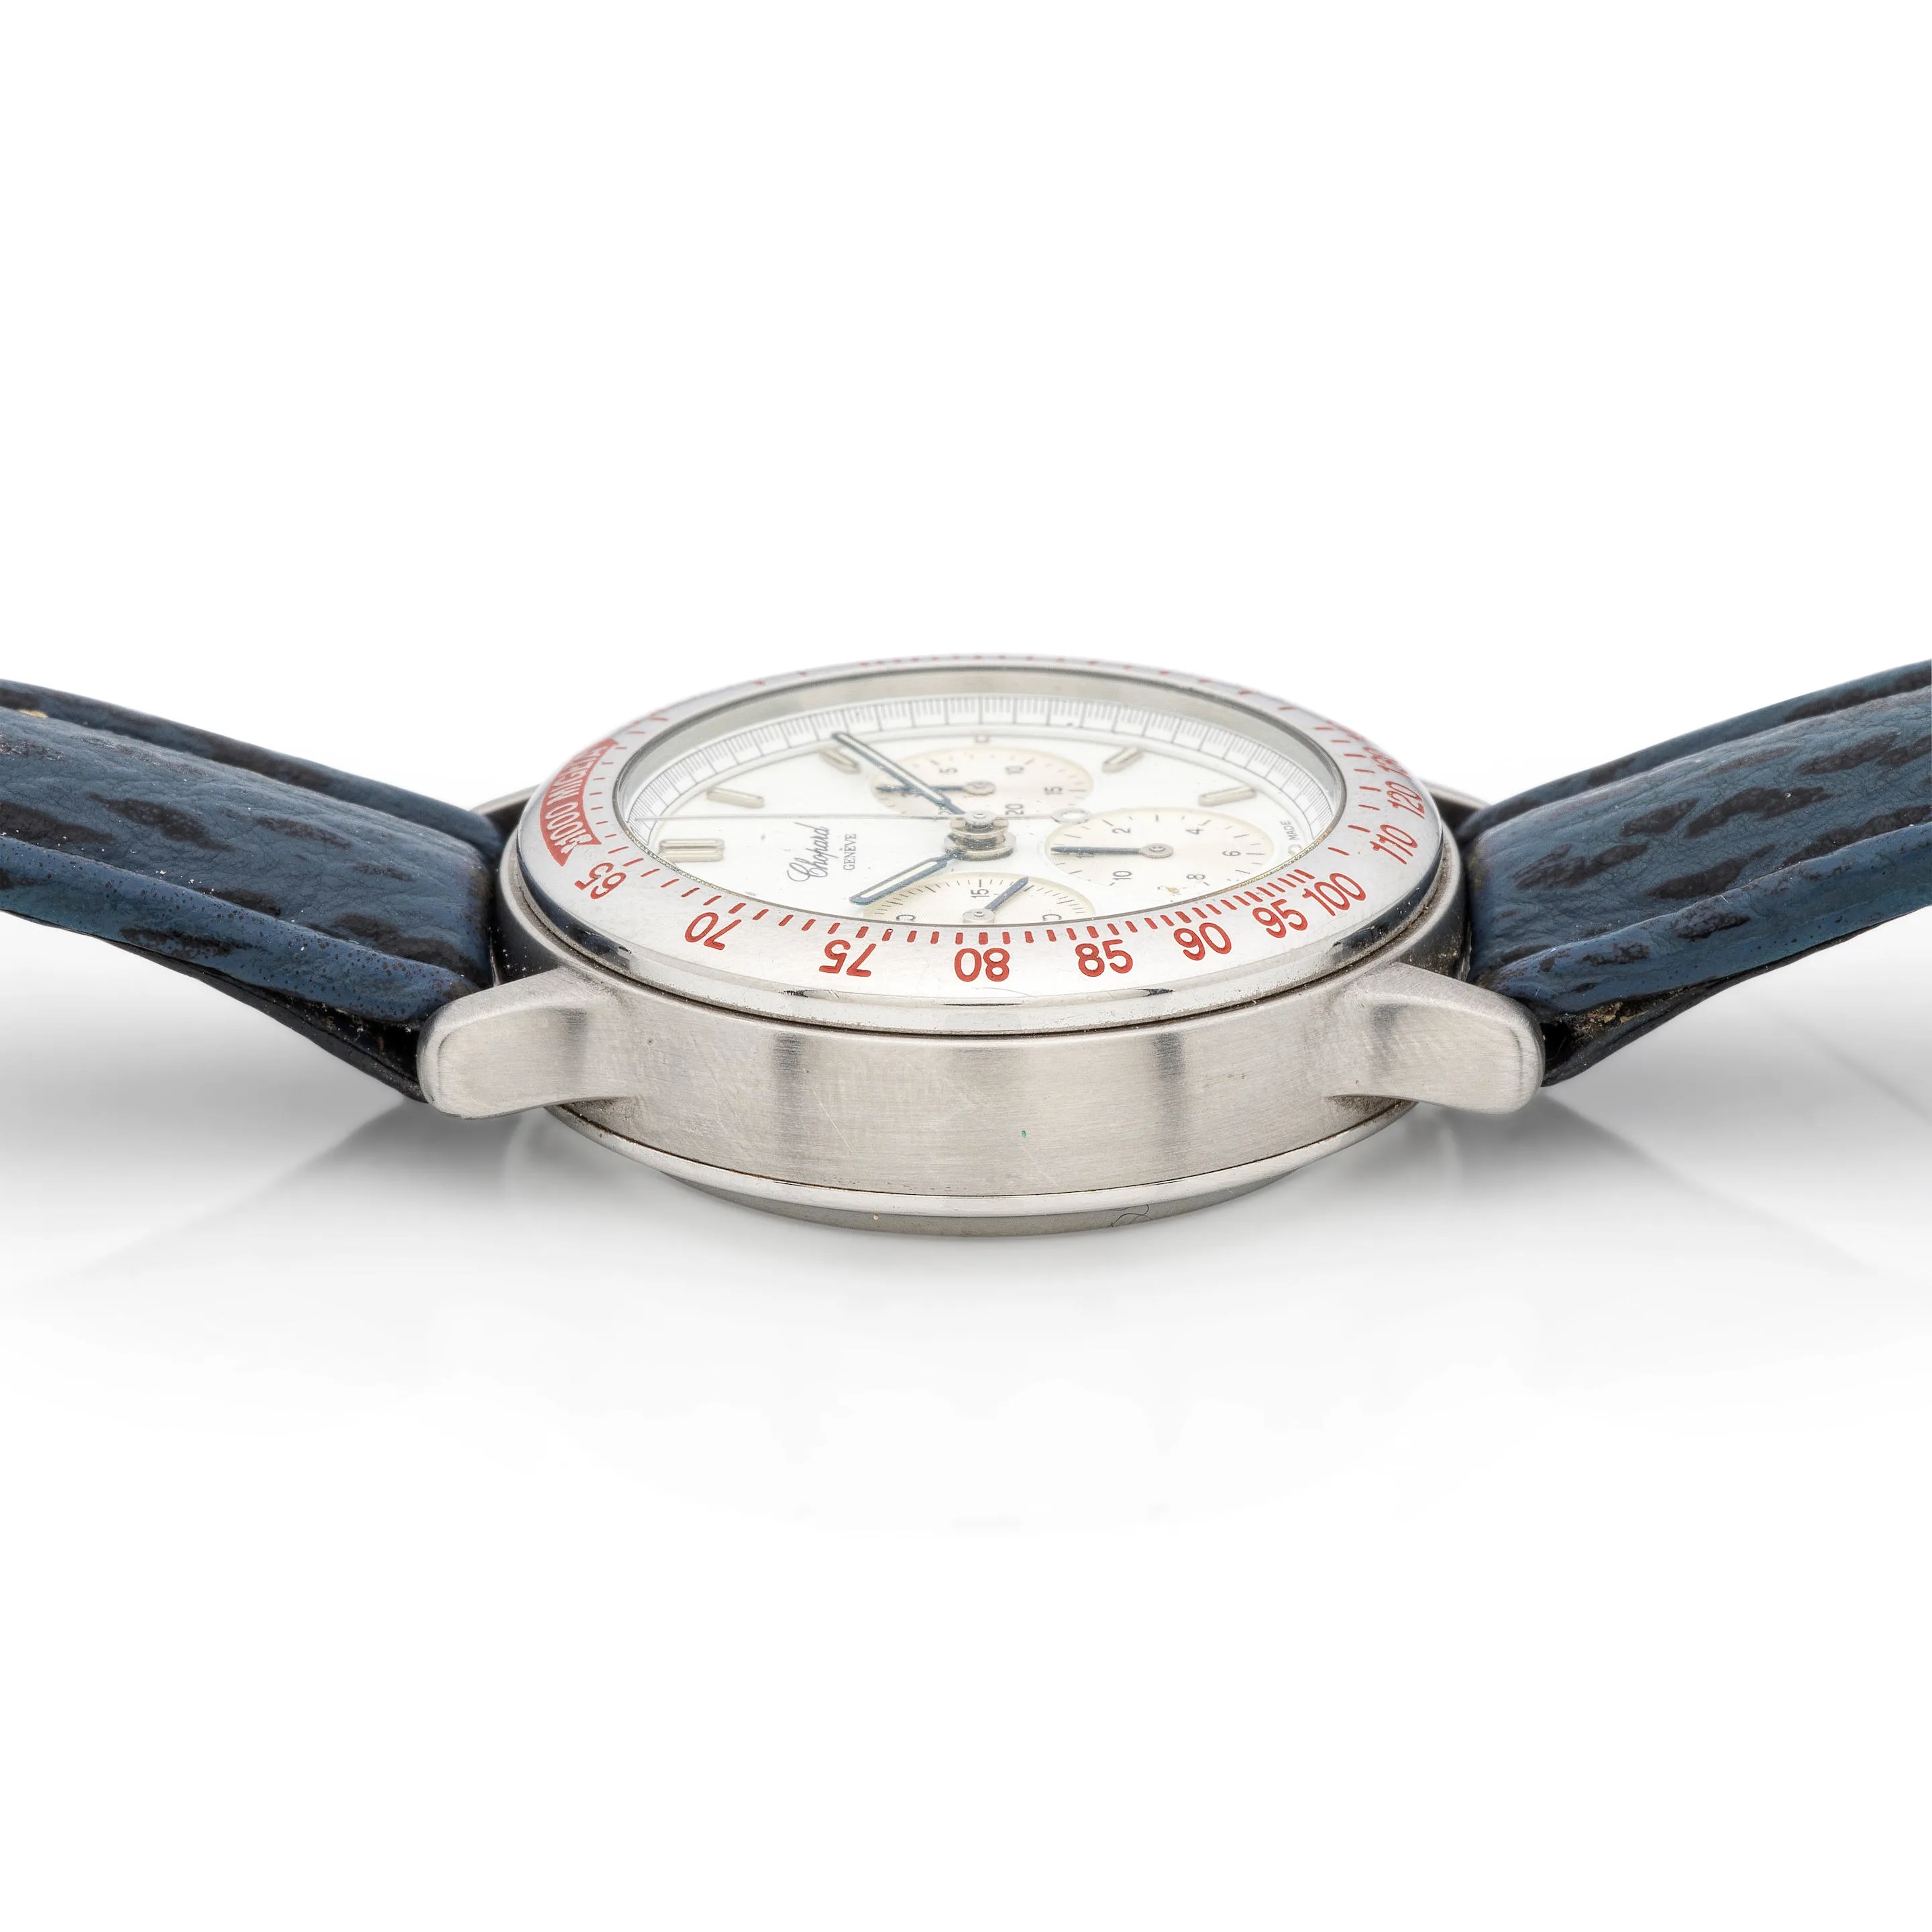 Chopard Mille Miglia 8179 37mm Stainless steel White 1